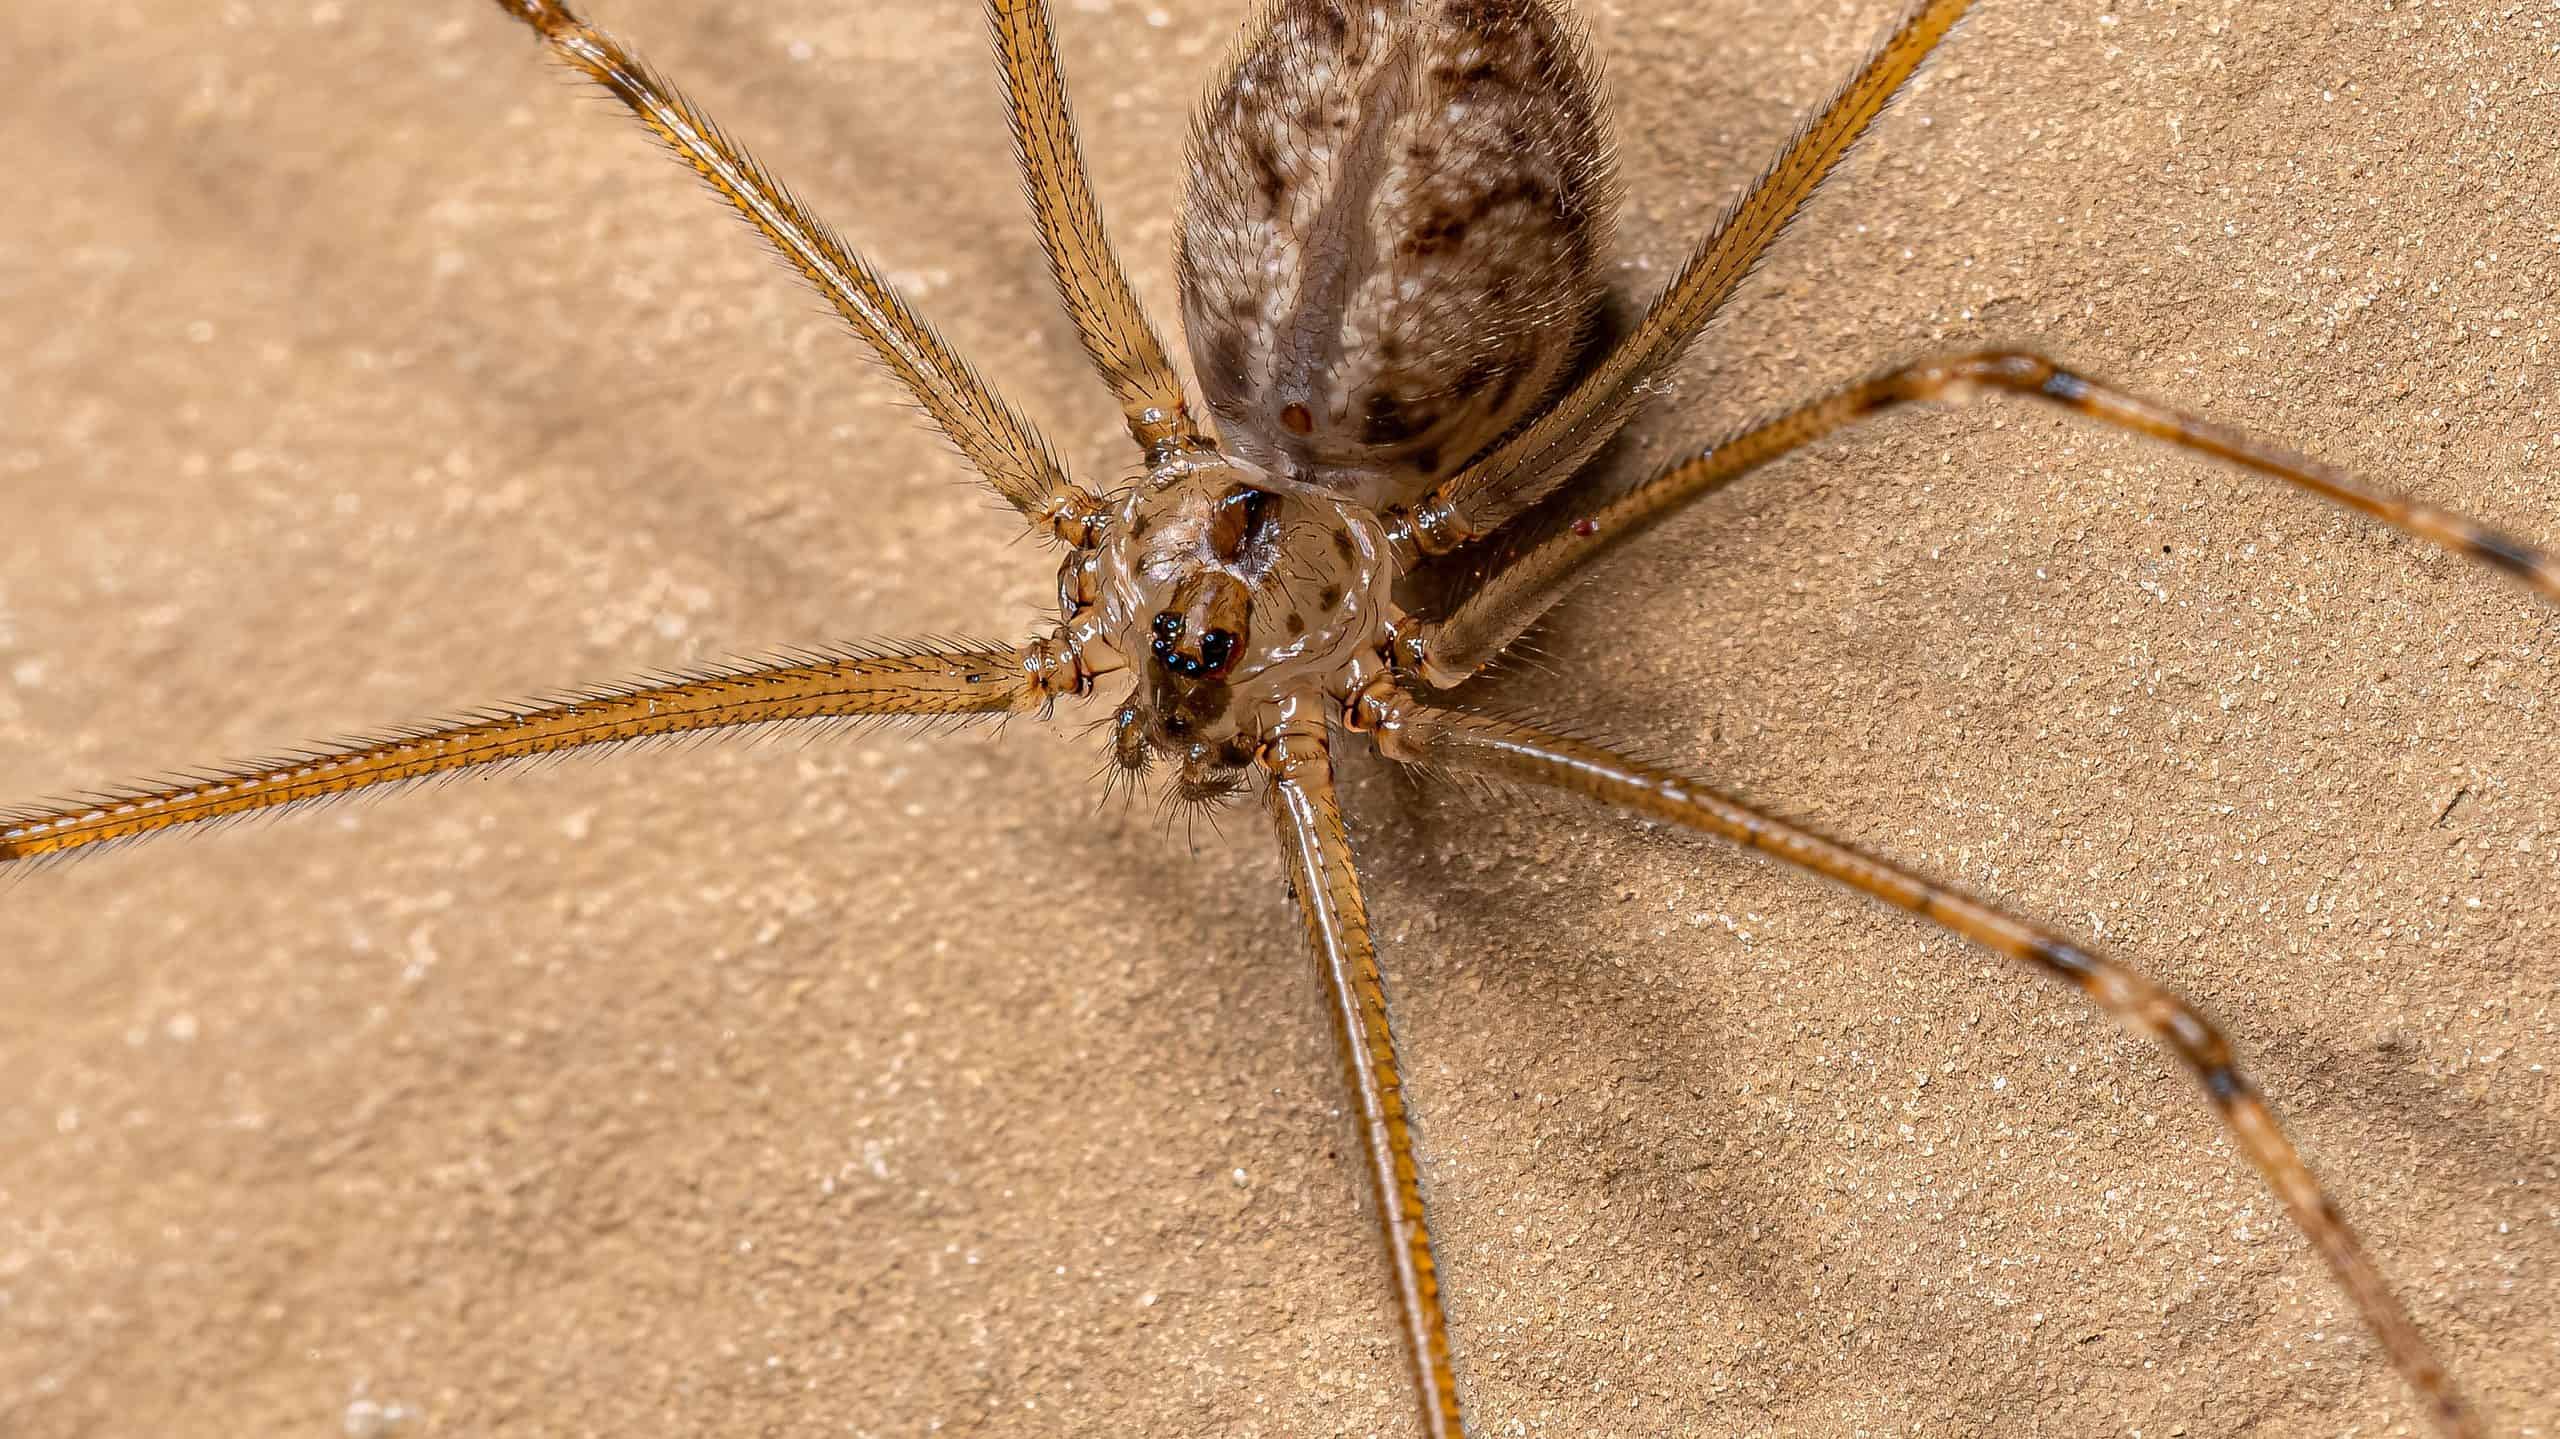 Daddy Longlegs: Two Eyes, Eight Legs, And No Webs